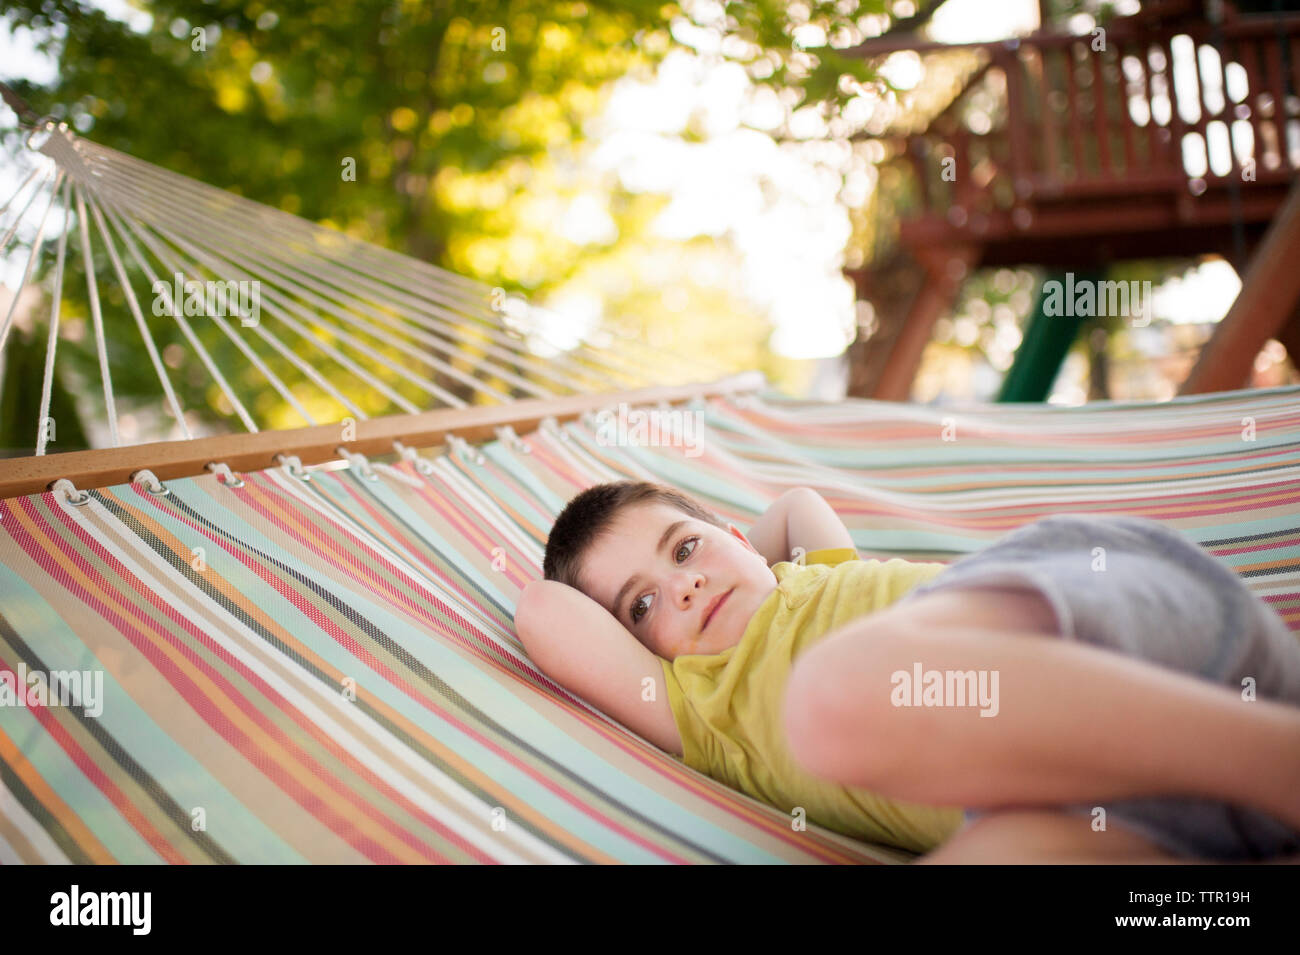 Thoughtful boy with hands behind head lying in hammock at park Stock Photo